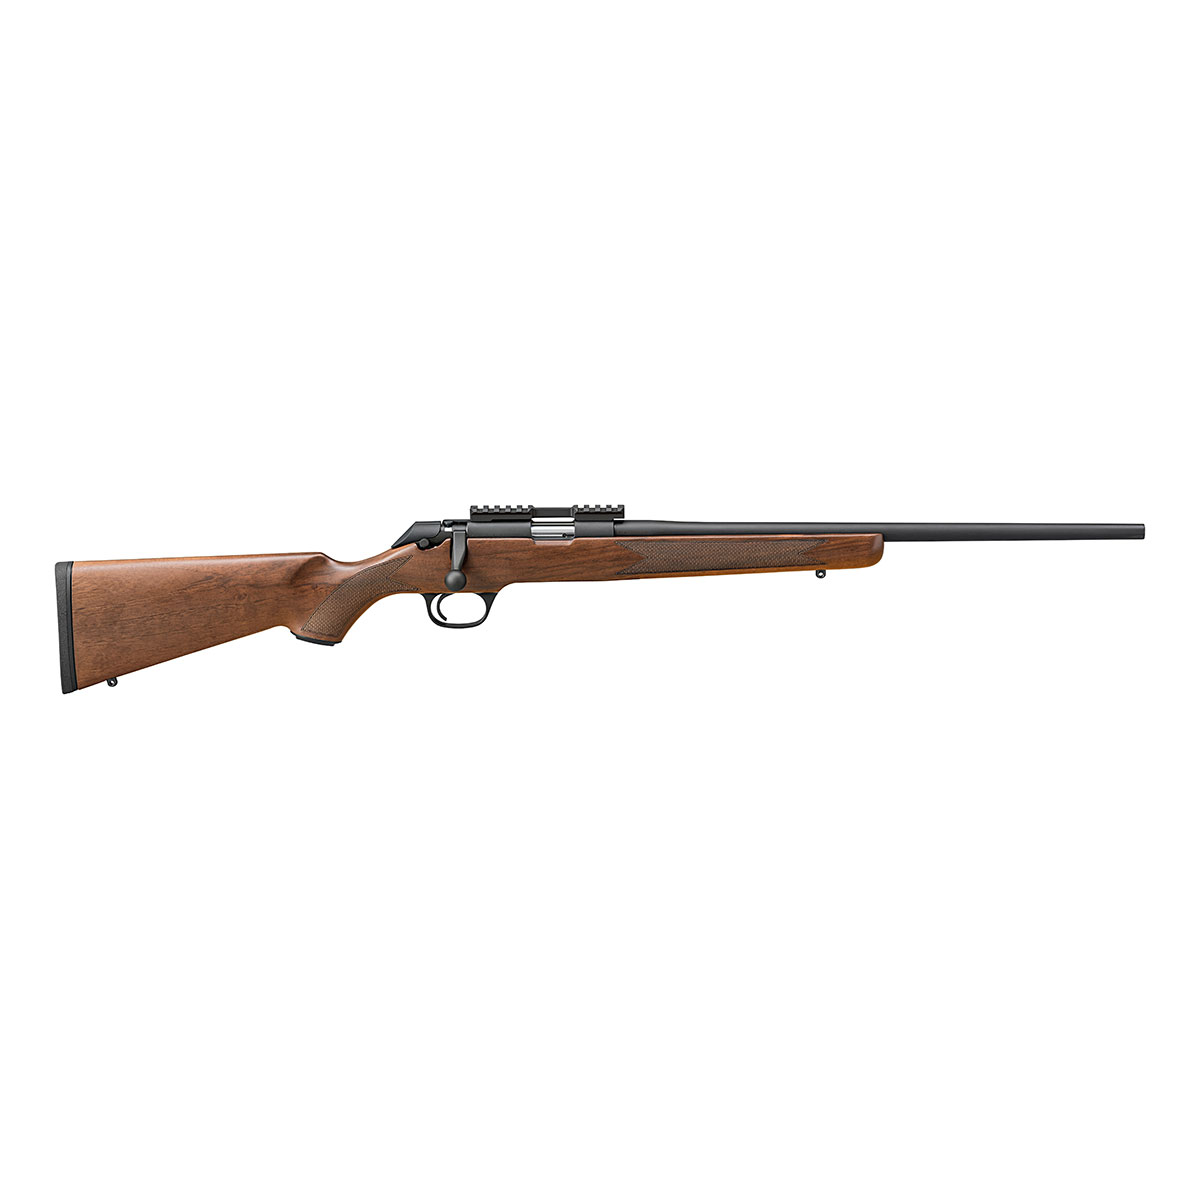 SPRINGFIELD ARMORY - MODEL 2020 RIMFIRE CLASSIC 22 LONG RIFLE BOLT ACTION RIFLE